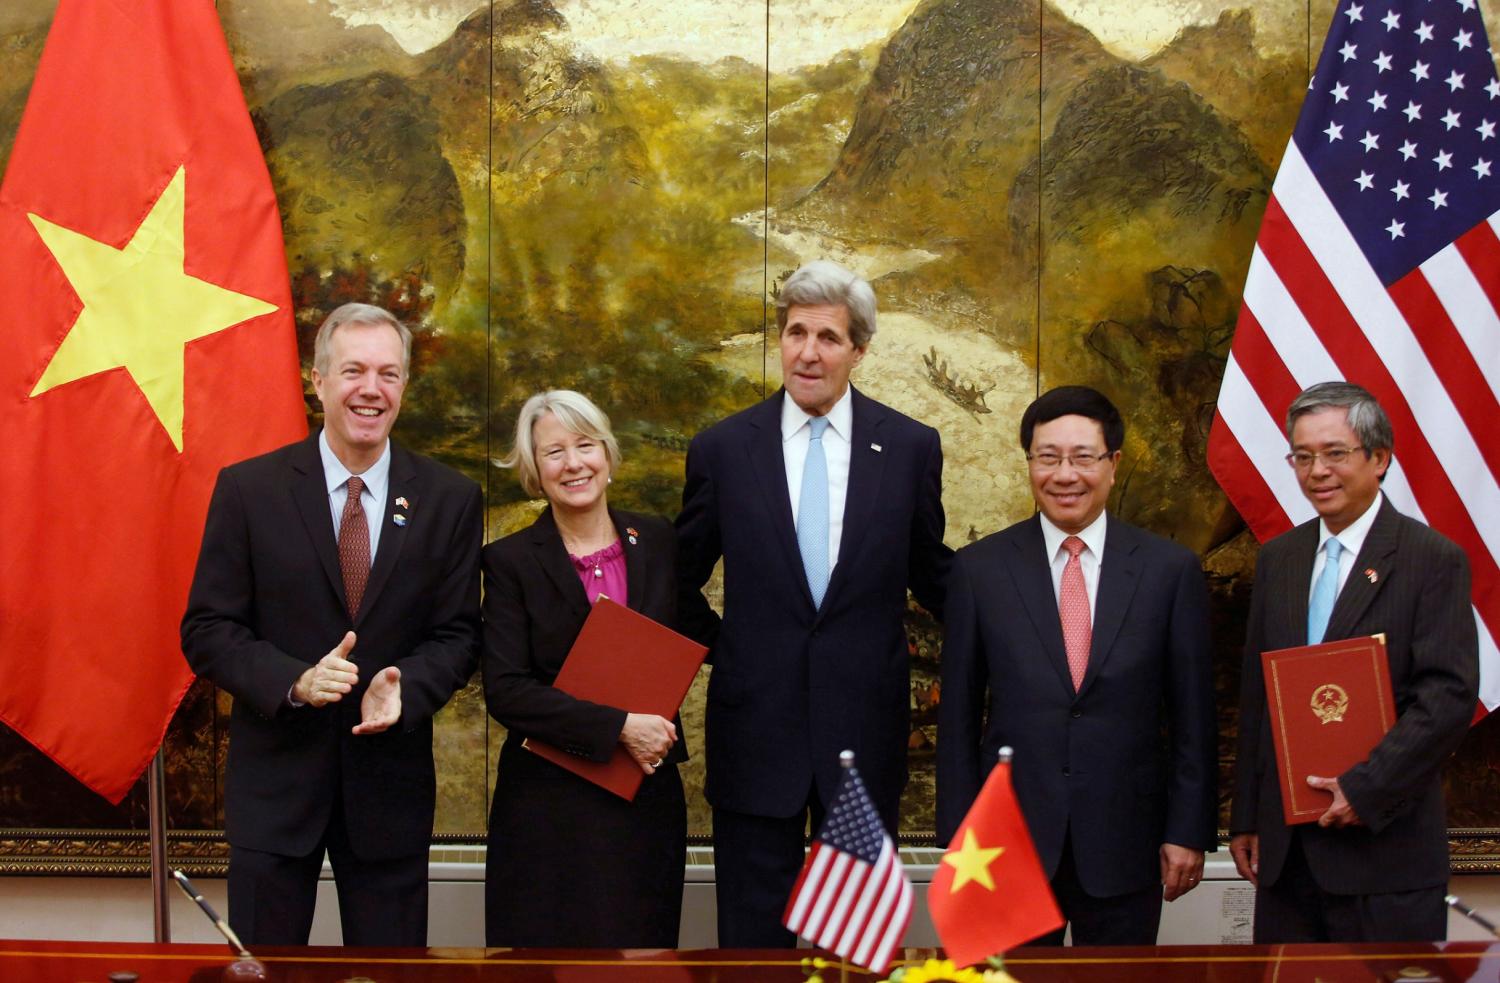 U.S. Peace Corps Director Carolyn Hessler Radelet (2nd L) and Vietnamese ambassador to the U.S. Pham Quang Vinh (R) pose for a photo with U.S. Secretary of State John Kerry (C), US ambassador to Vietnam Ted Osius (L) and Vietnam's Deputy Prime Minister and Foreign Minister Pham Binh Minh (2nd R) after a signing ceremony of Peace Corps Operation in Vietnam at the Government Guesthouse as part of the visit by U.S. President Barack Obama in Hanoi, Vietnam May 24, 2016. REUTERS/Kham - S1BETFUSCQAA